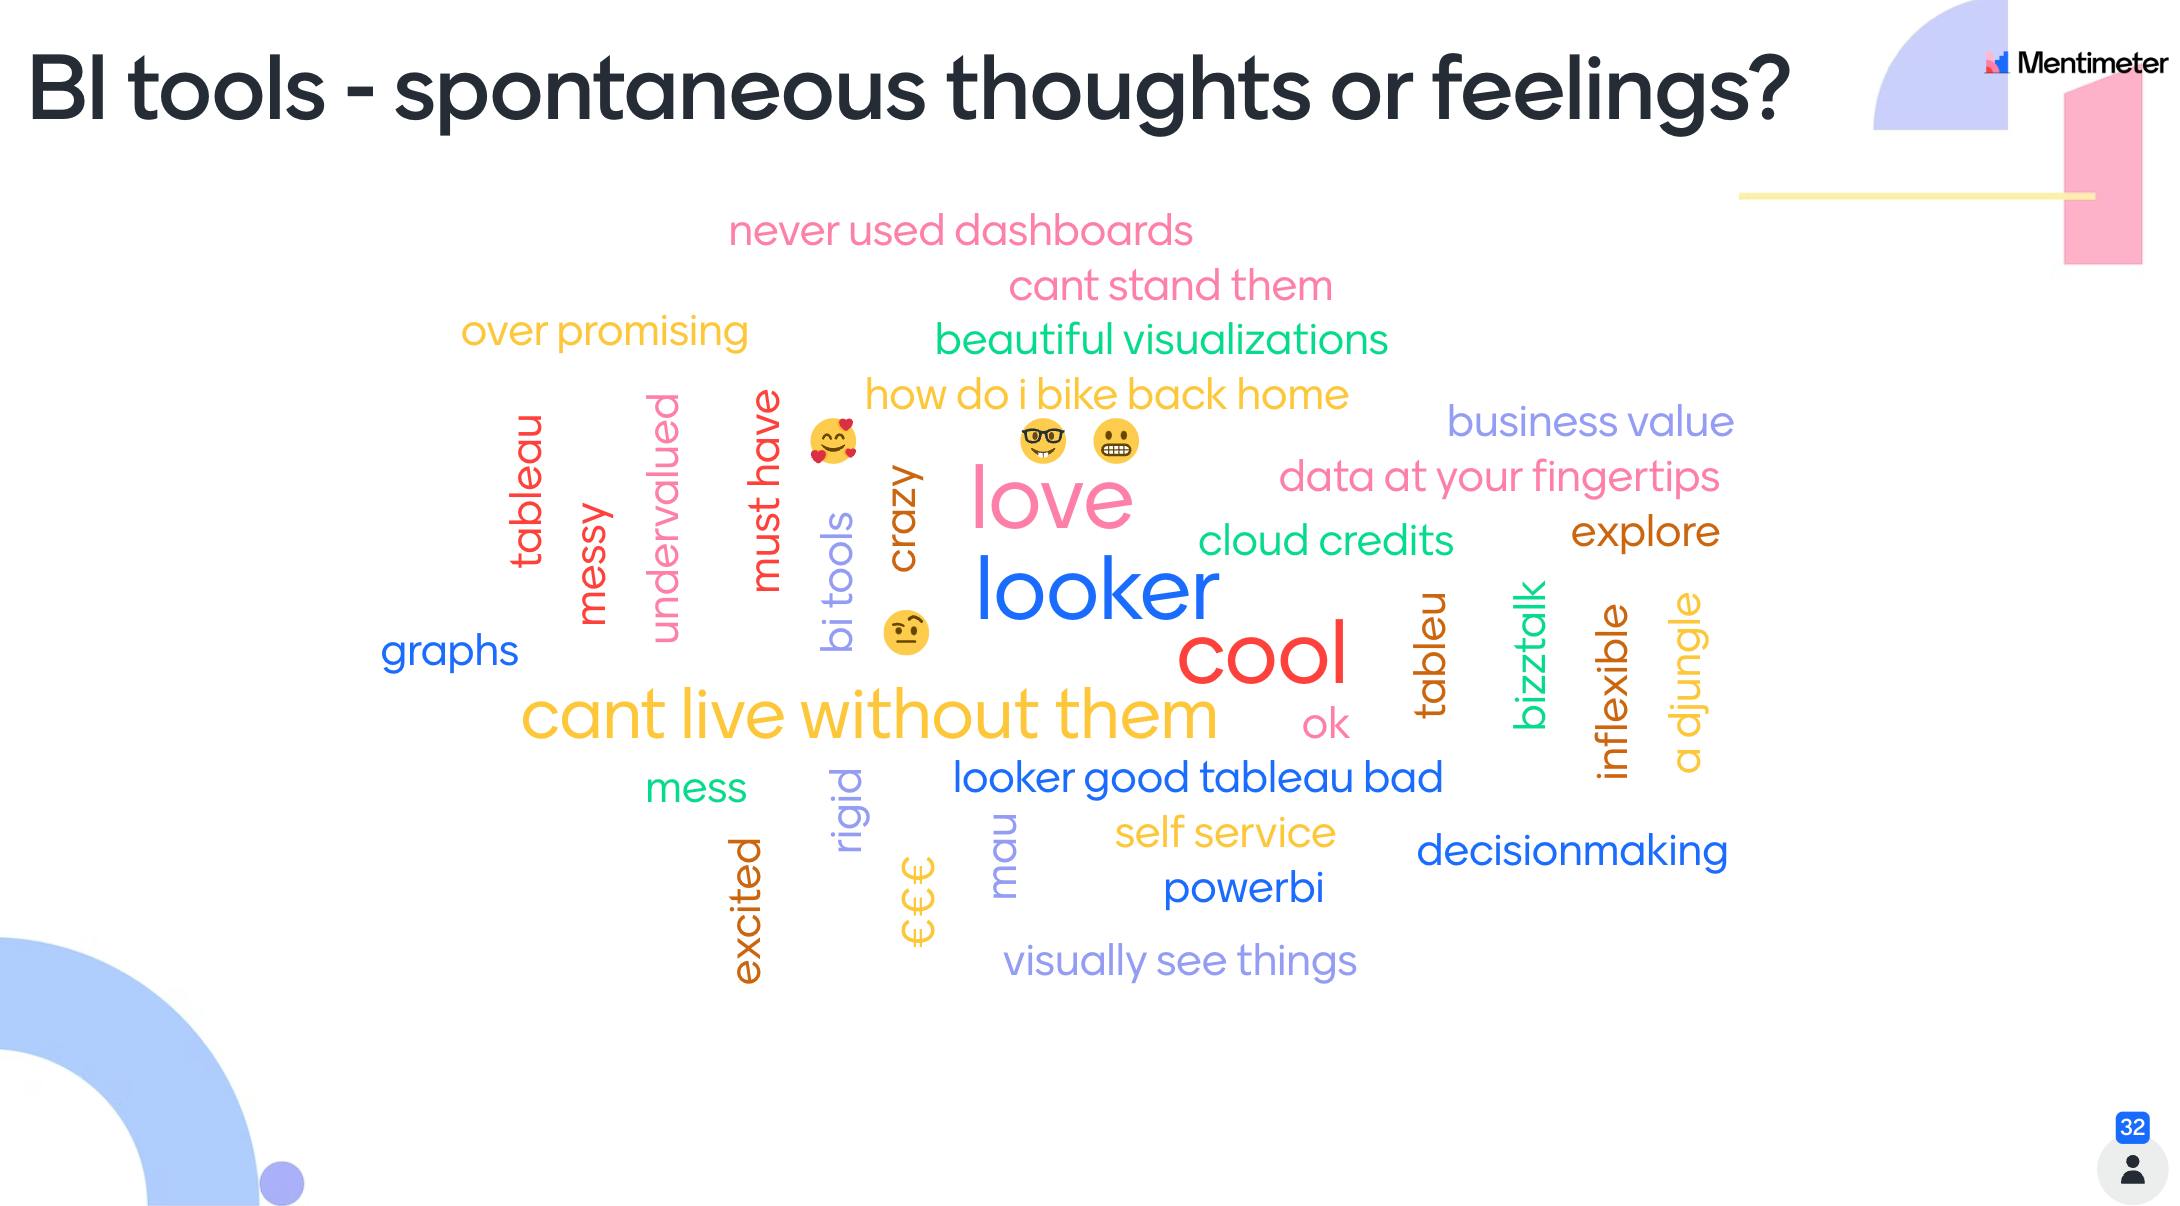 The audience’s feelings about BI tools ranged from “rigid” and “inflexible” to “cool” and even “love.”